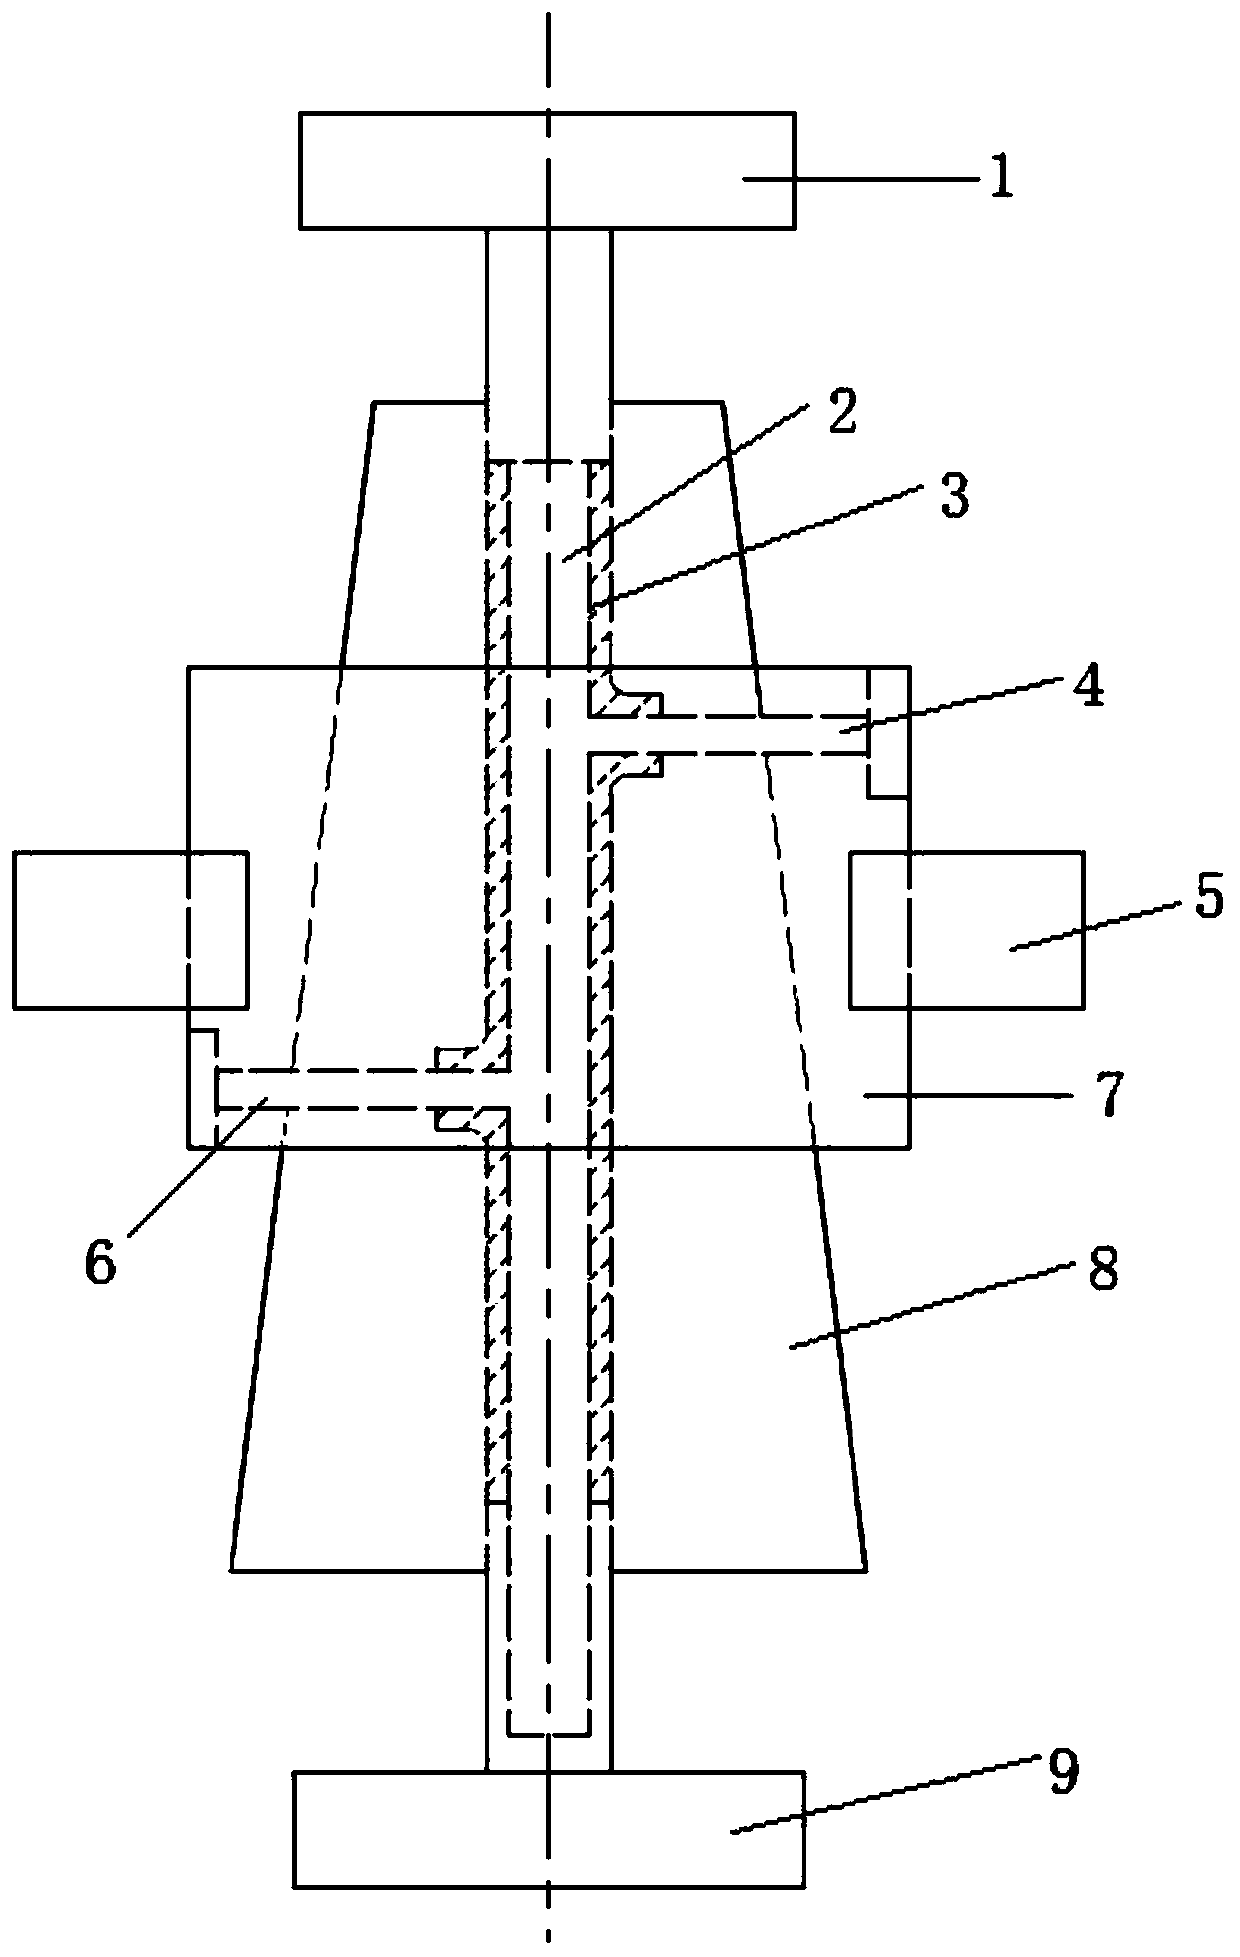 Device and method for simultaneous forming of double nozzles by uniaxial extrusion